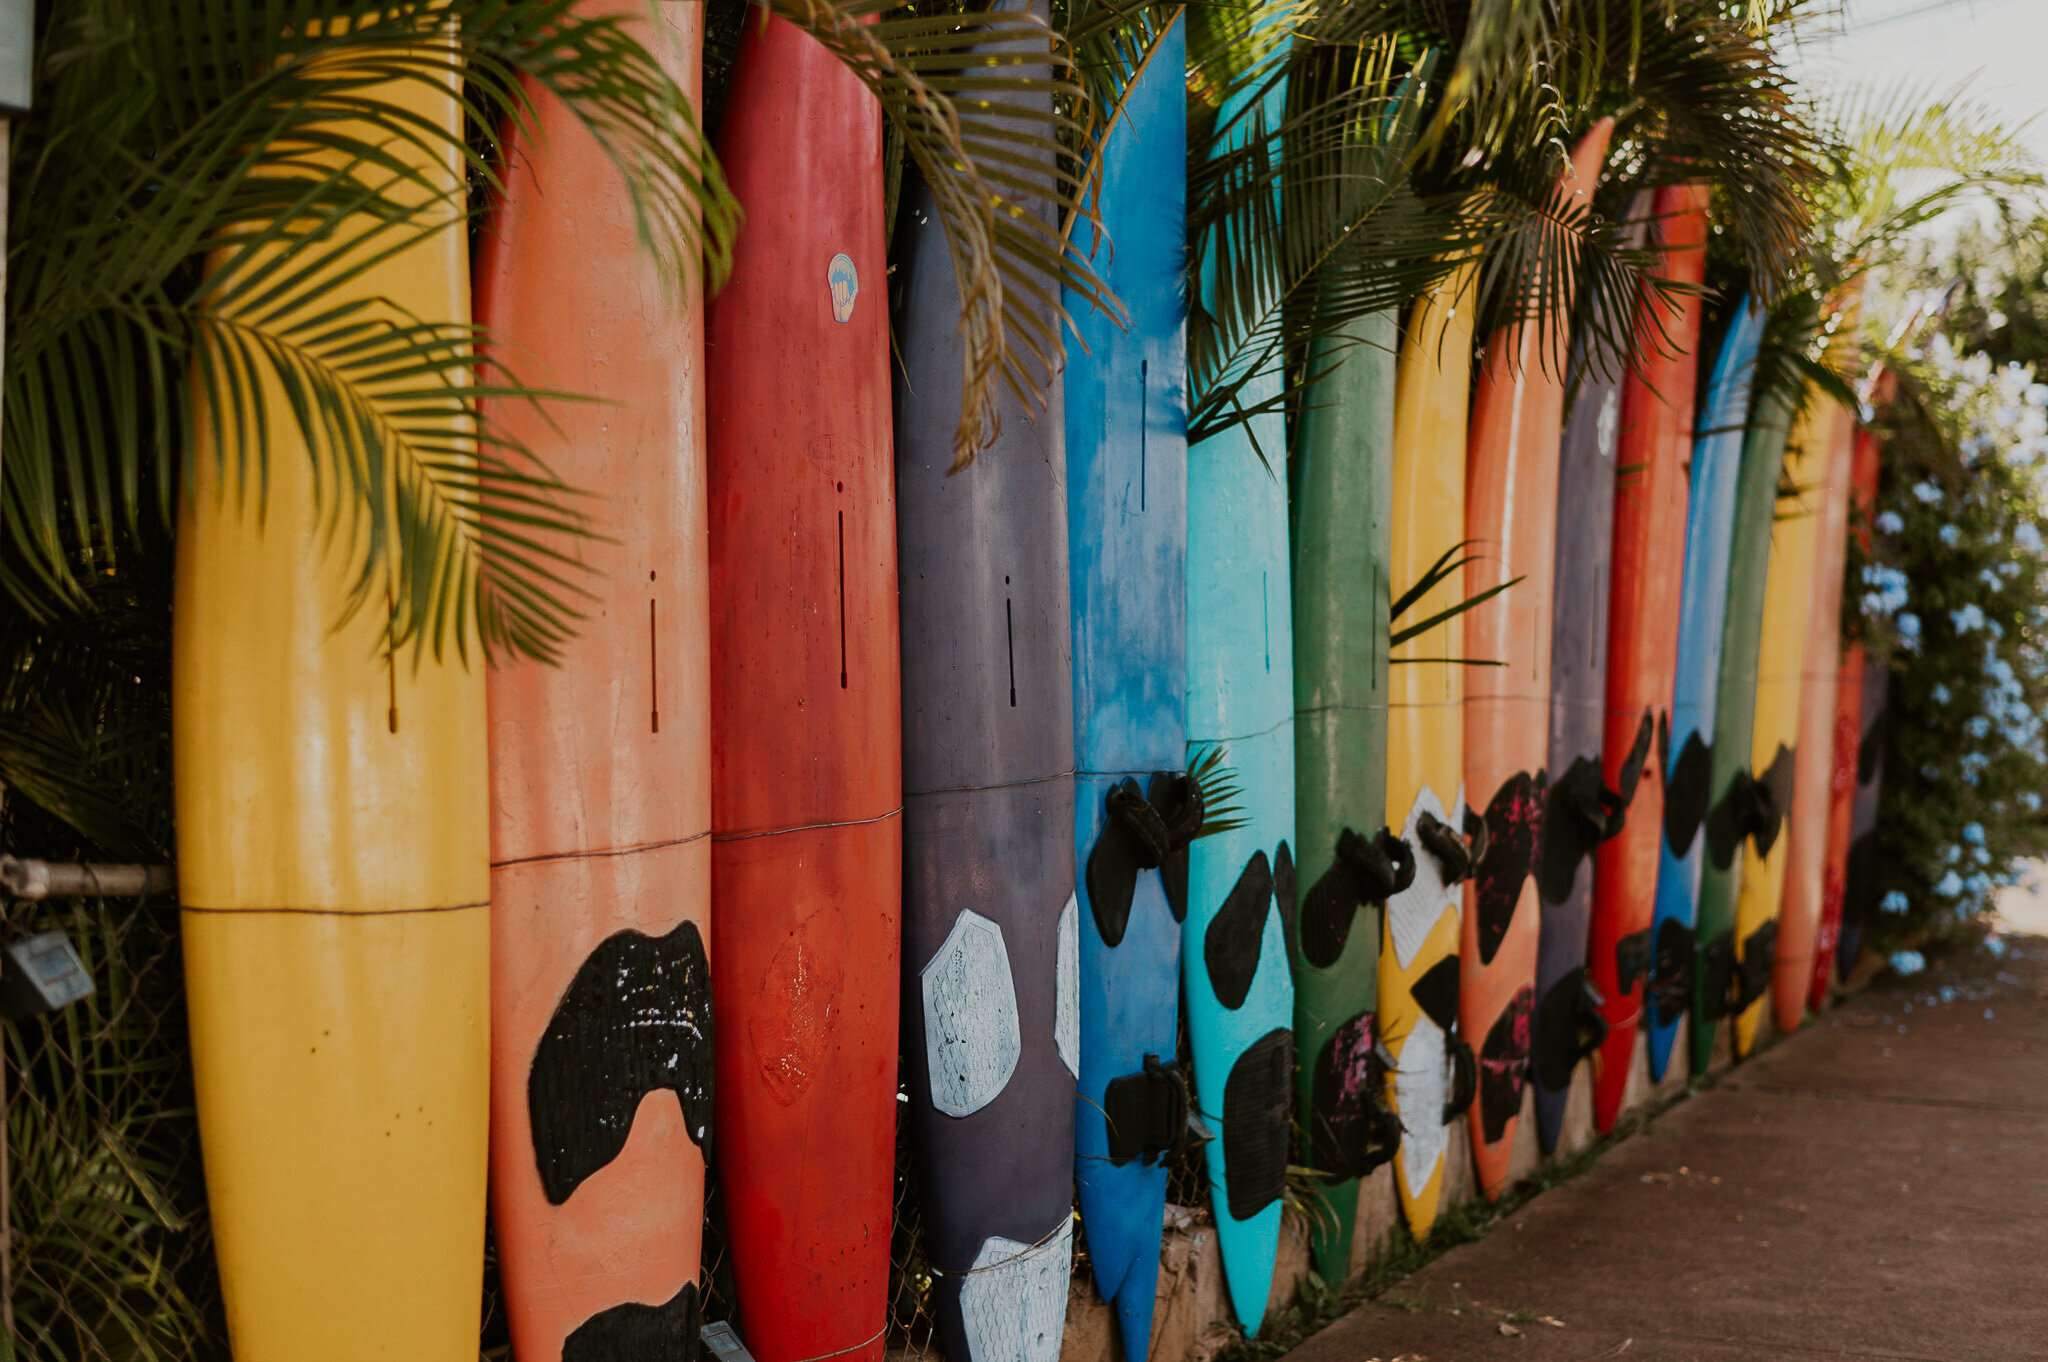 The coolest surfboard fence ever!